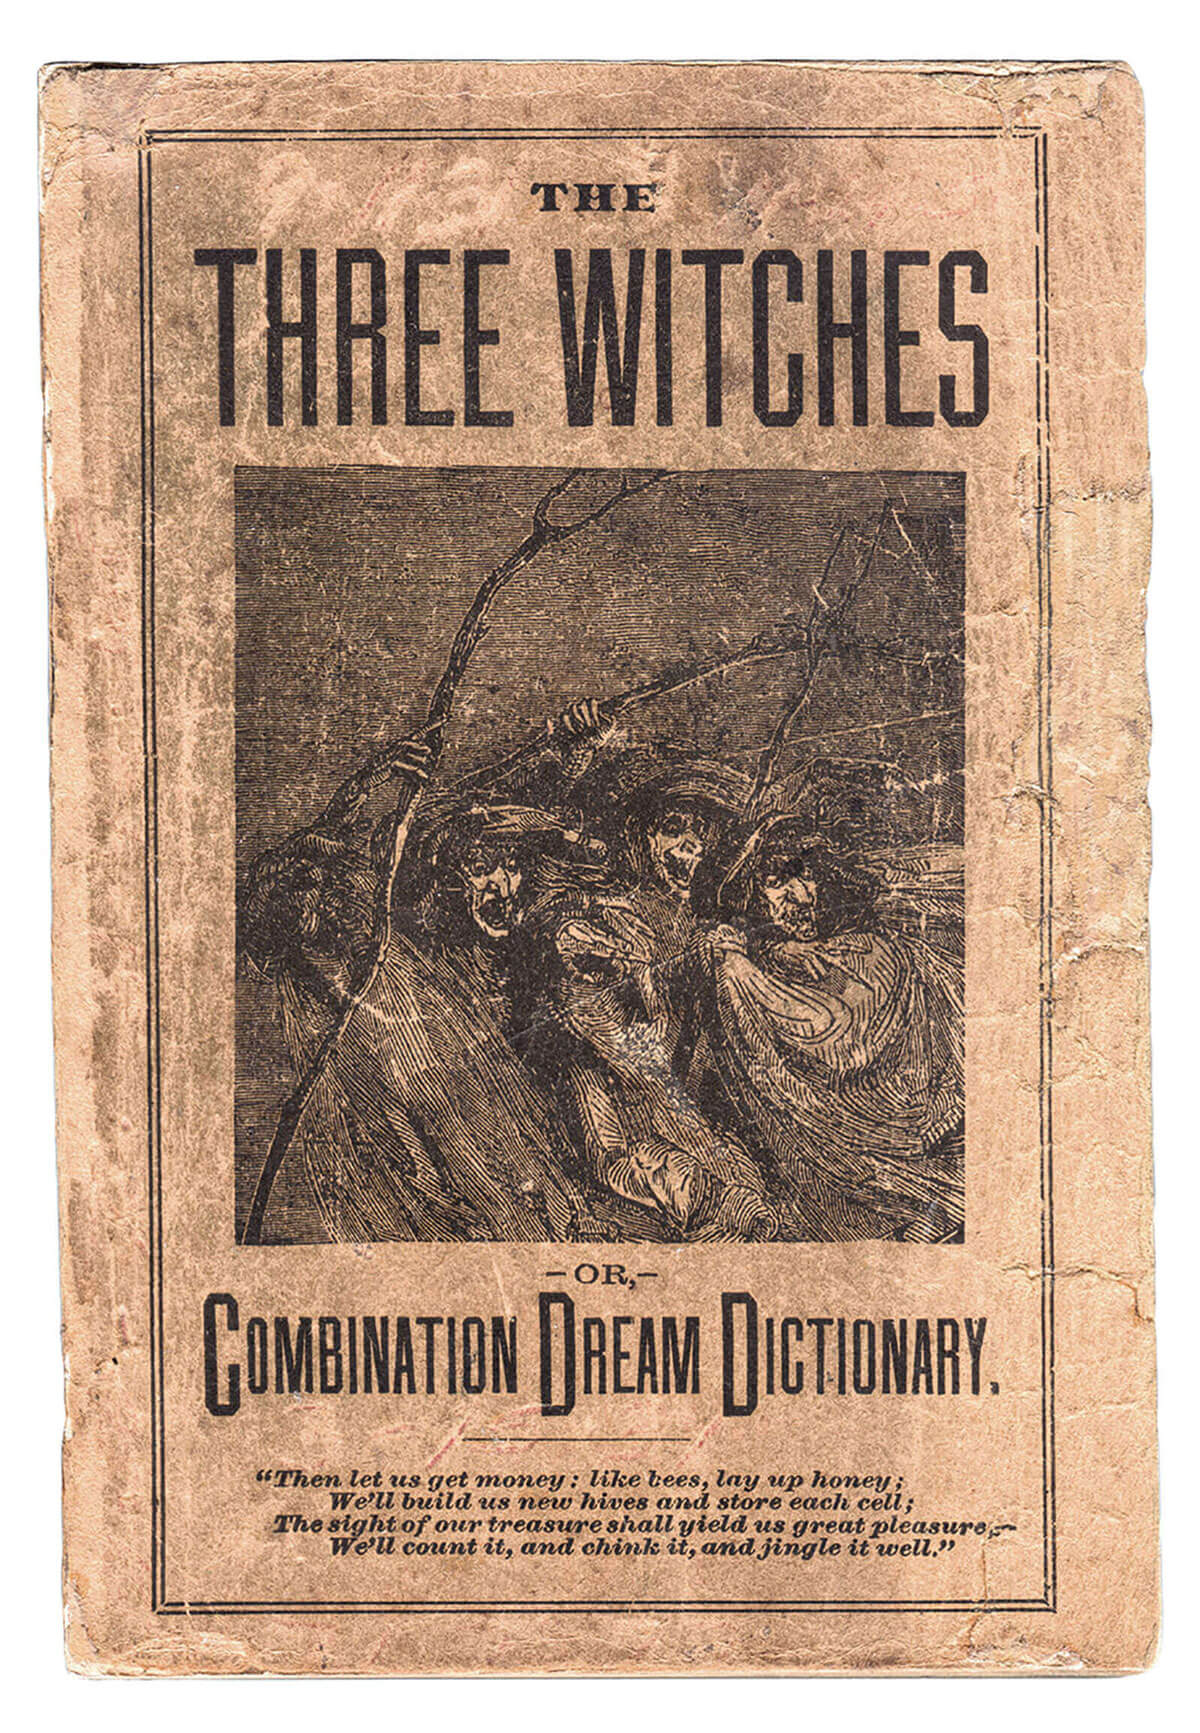 The Three Witches—or,—Combination Dream Dictionary, printed in Baltimore in 1887. The book was notable in that it dispensed with any dream interpretation, and instead simply assigned lucky numbers to each entry. Additionally, the numbers it provided depended on the city in which the dreamer lived; dreaming of an ant in New York, for example, was a sign to gamble on the numbers “7, 20, or 49,” while the same dream in Philadelphia signified “1, 2, 3, or 4.”